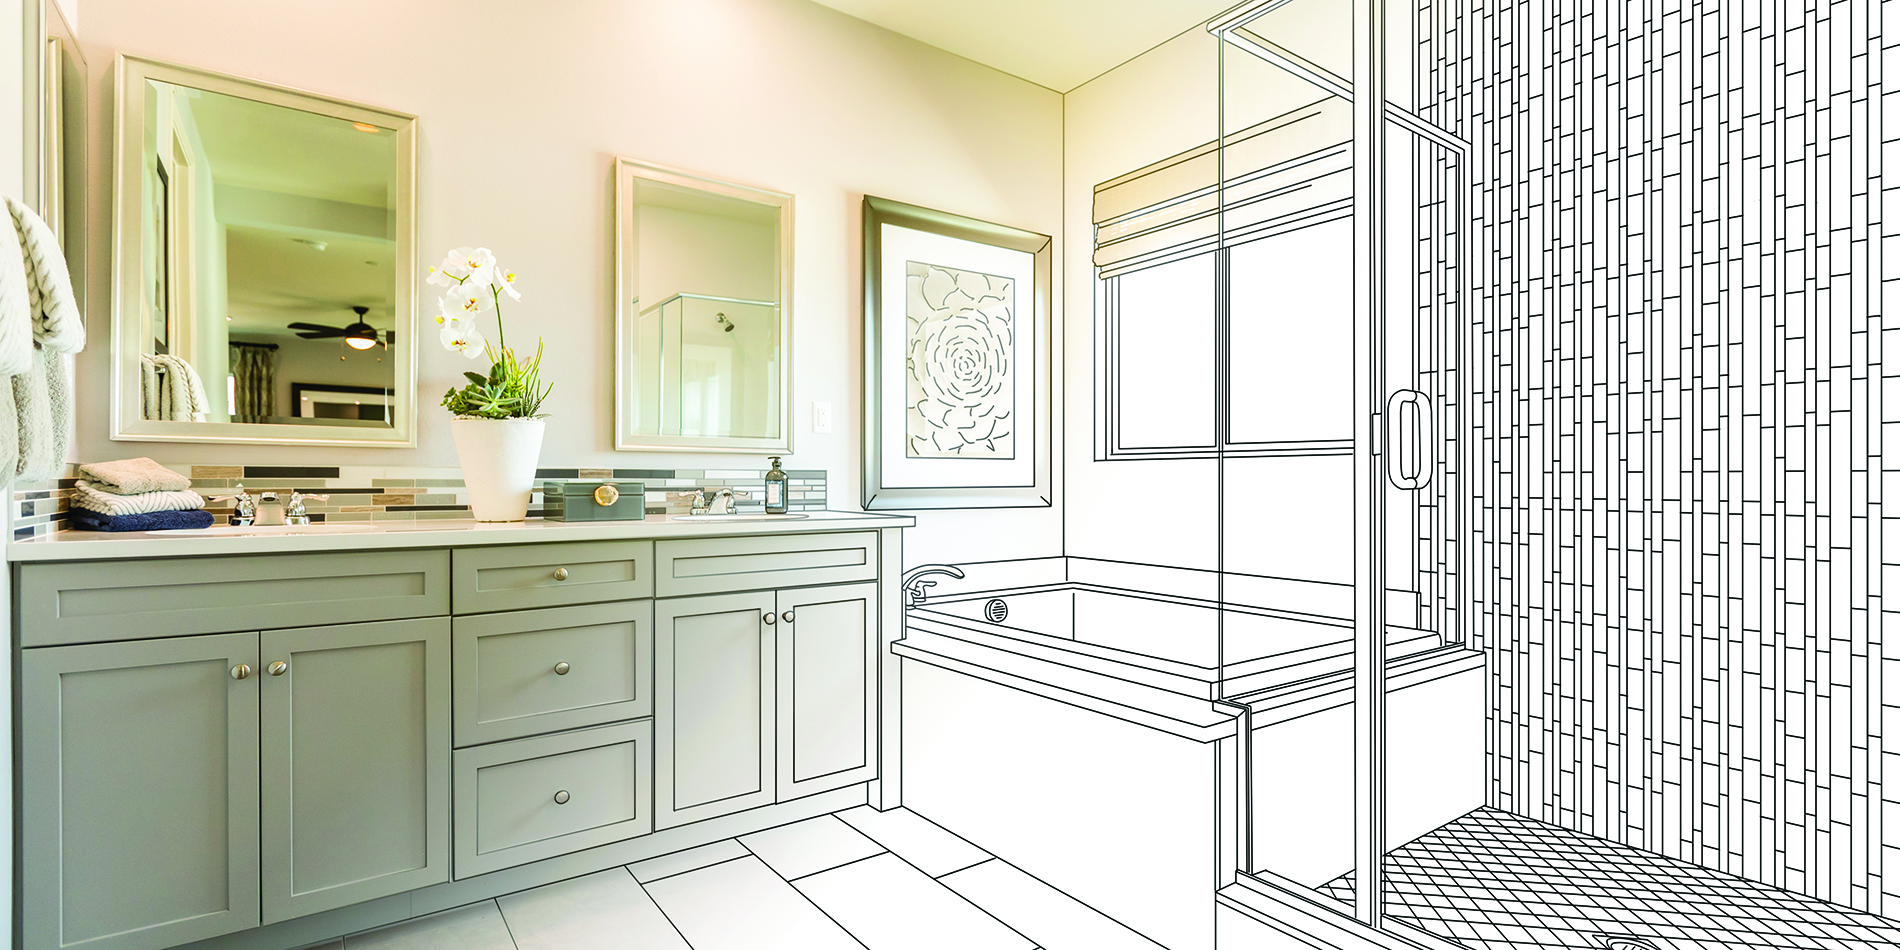 Custom Master Bathroom Design Drawing with Cross Section of Finished Photo.